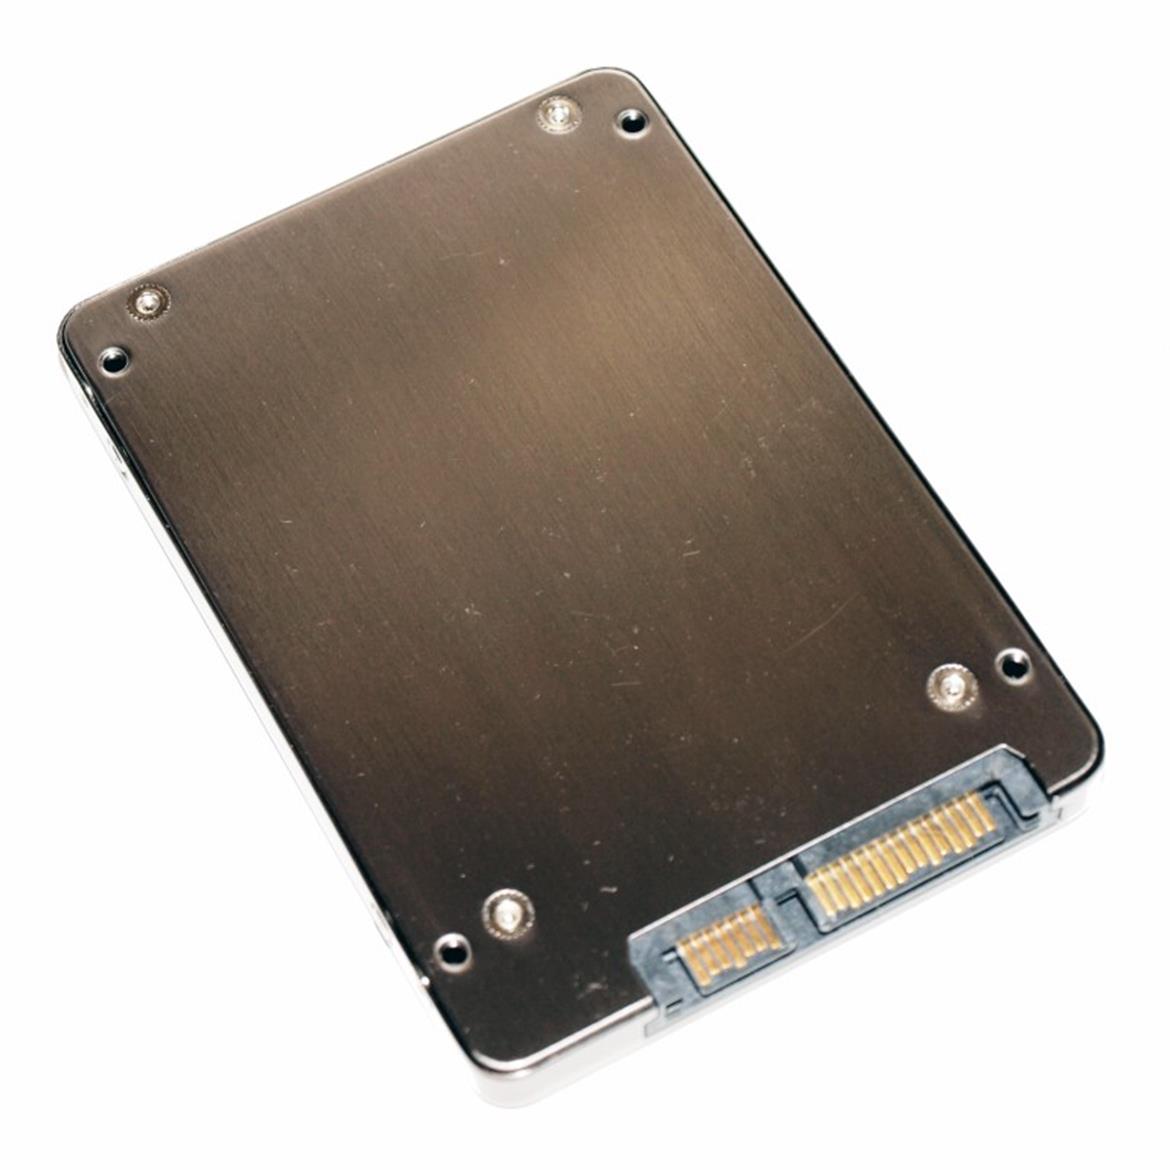 WD SiliconEdge Blue 256GB SSD Review